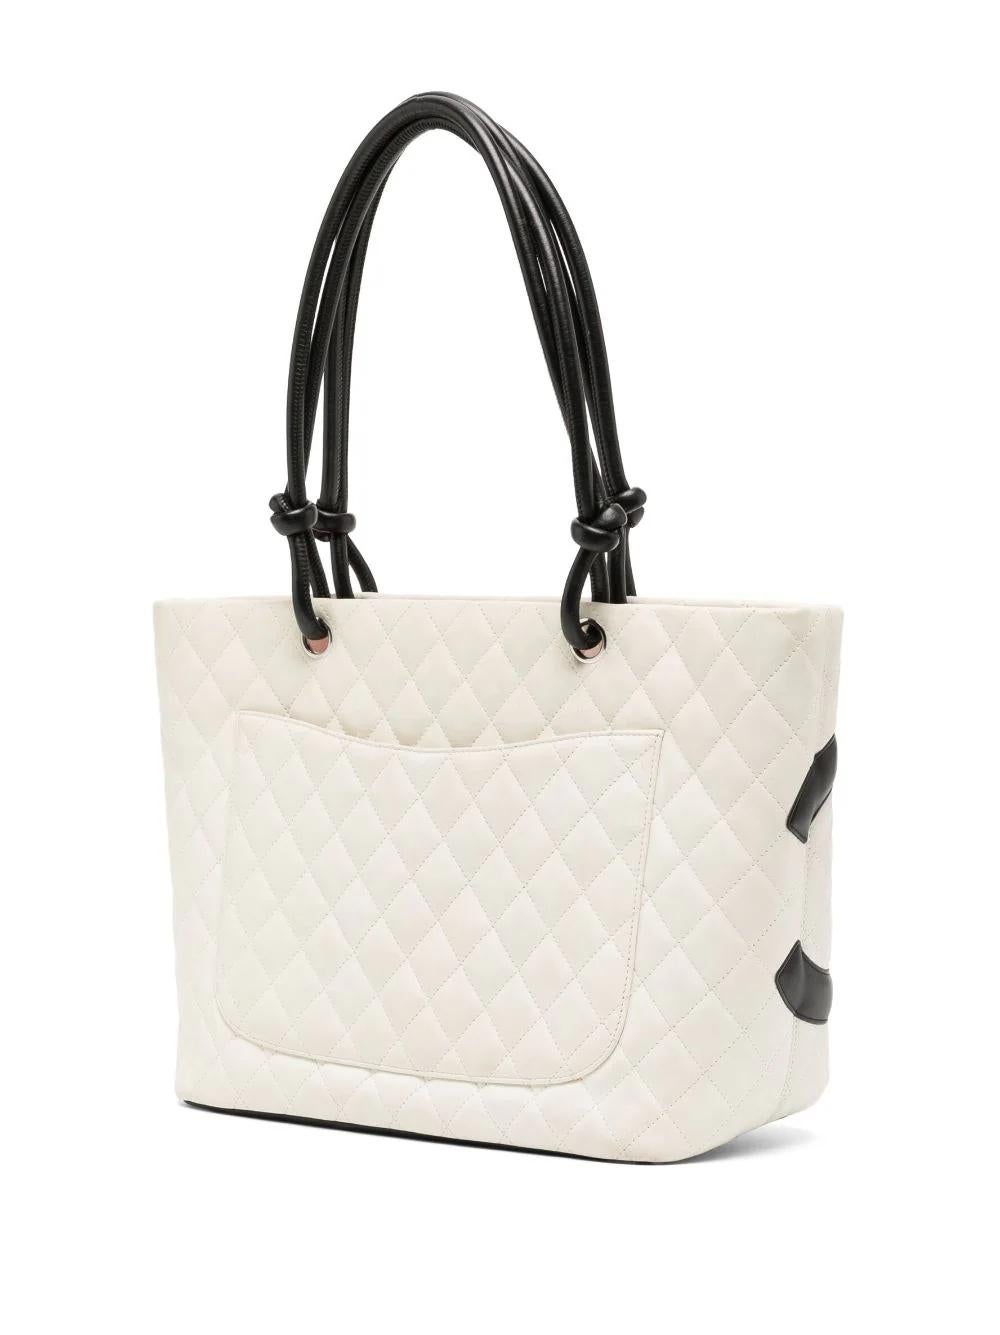 Crafted from a combination of white and black calfskin leather, this Chanel Quilted Tote features diamond quilting, a black logo patch, two leather straps, a top zip-fastening in bright pink that matches the interior lining and an internal